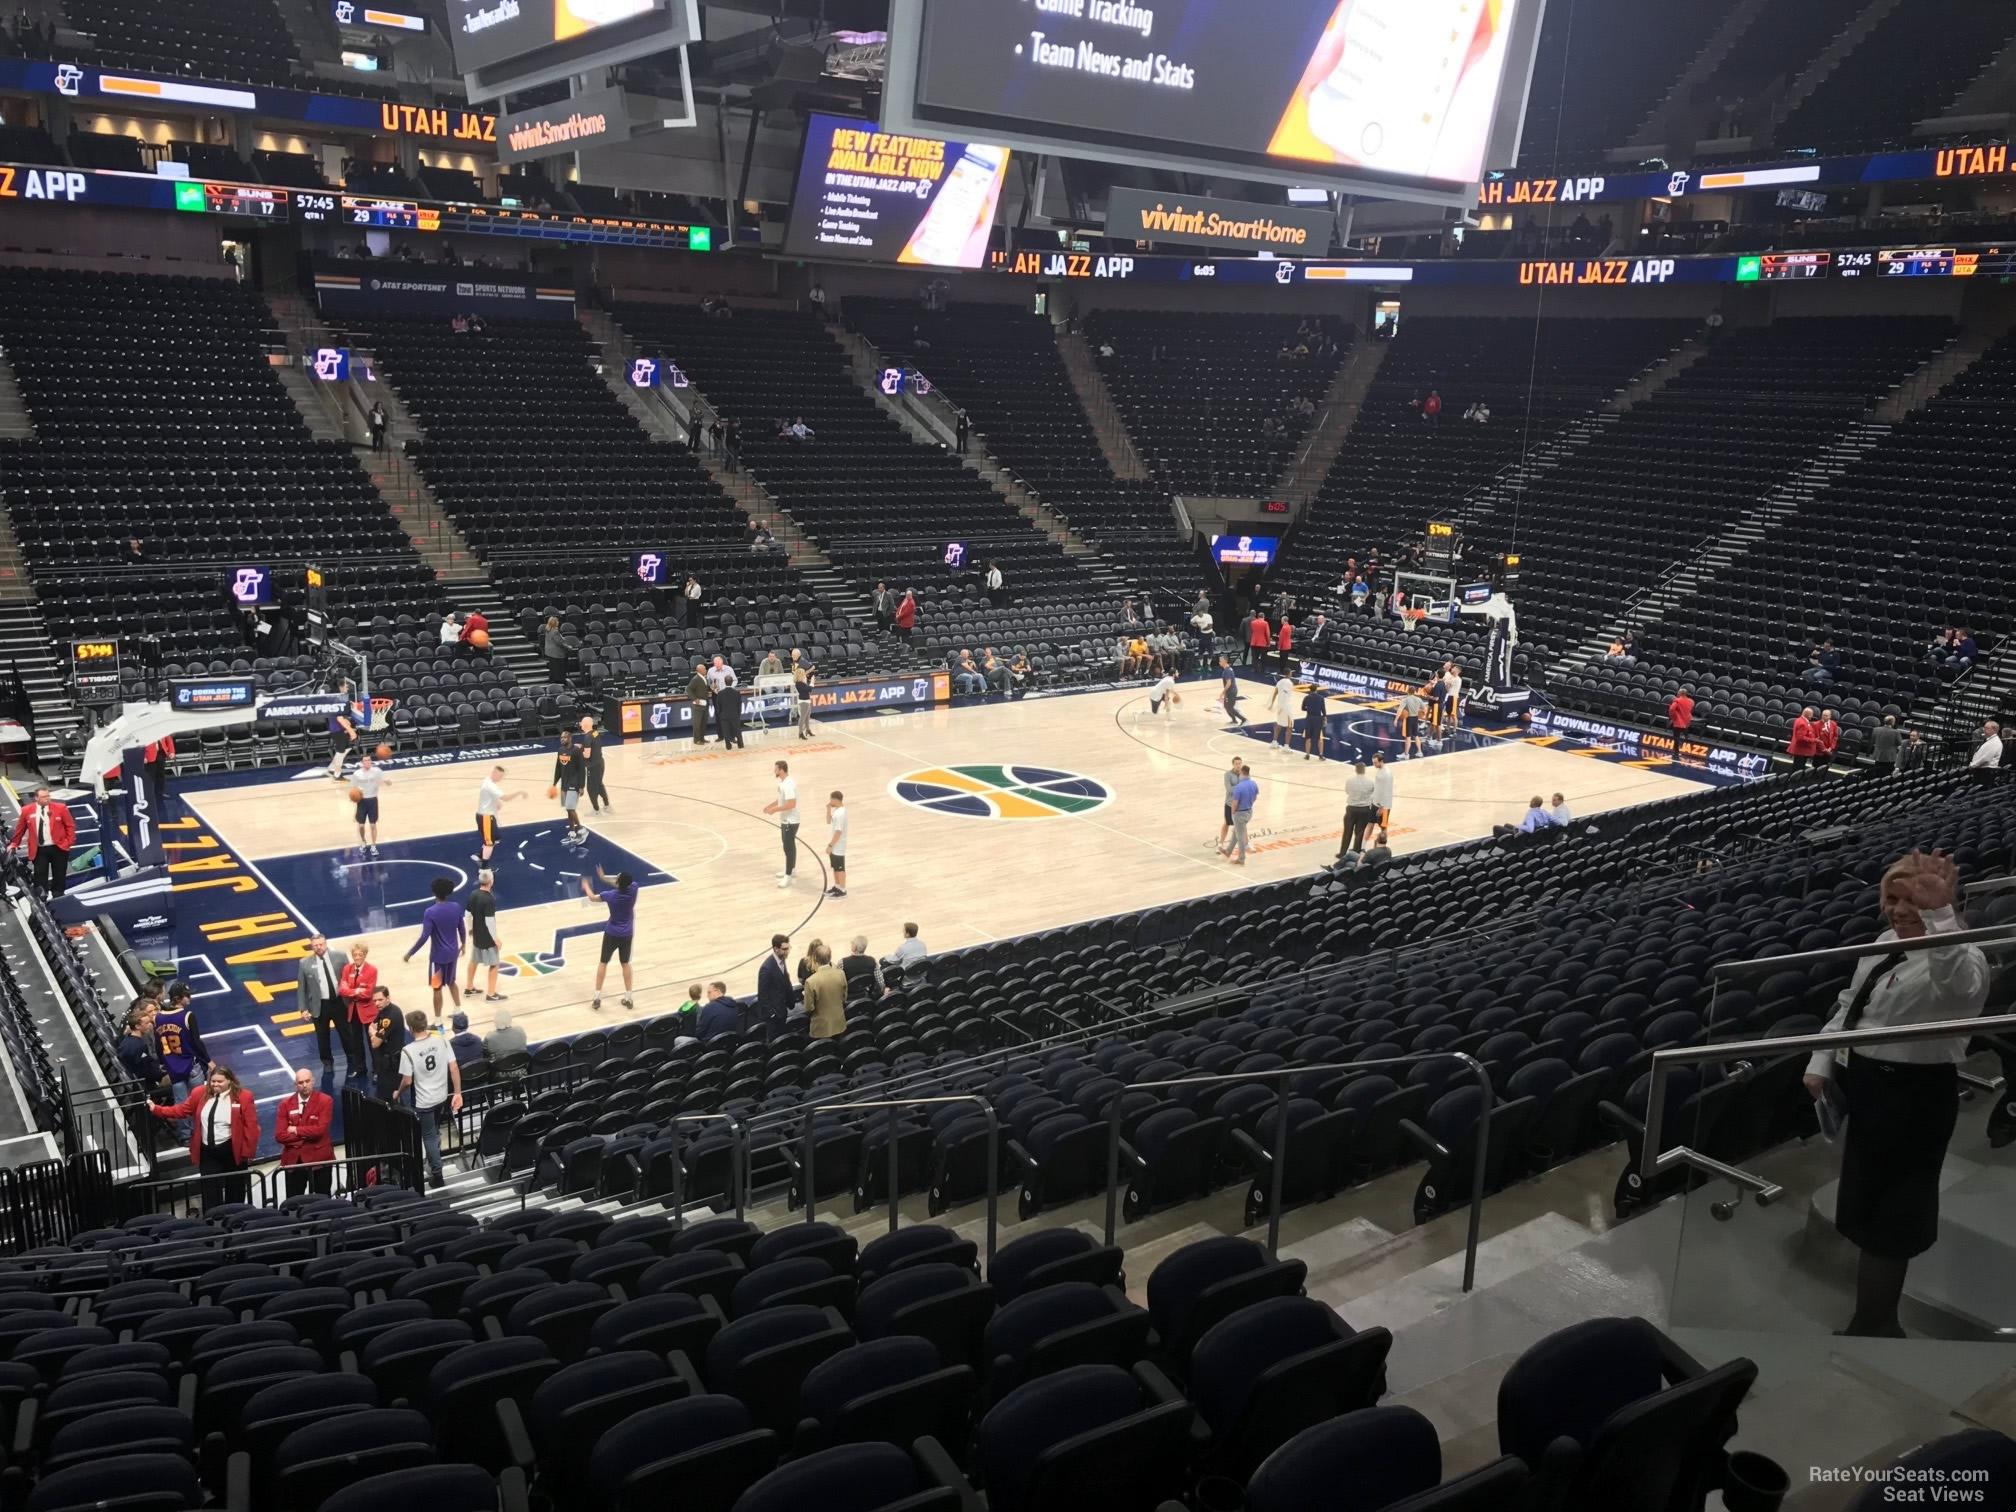 section 20, row 20 seat view  for basketball - delta center